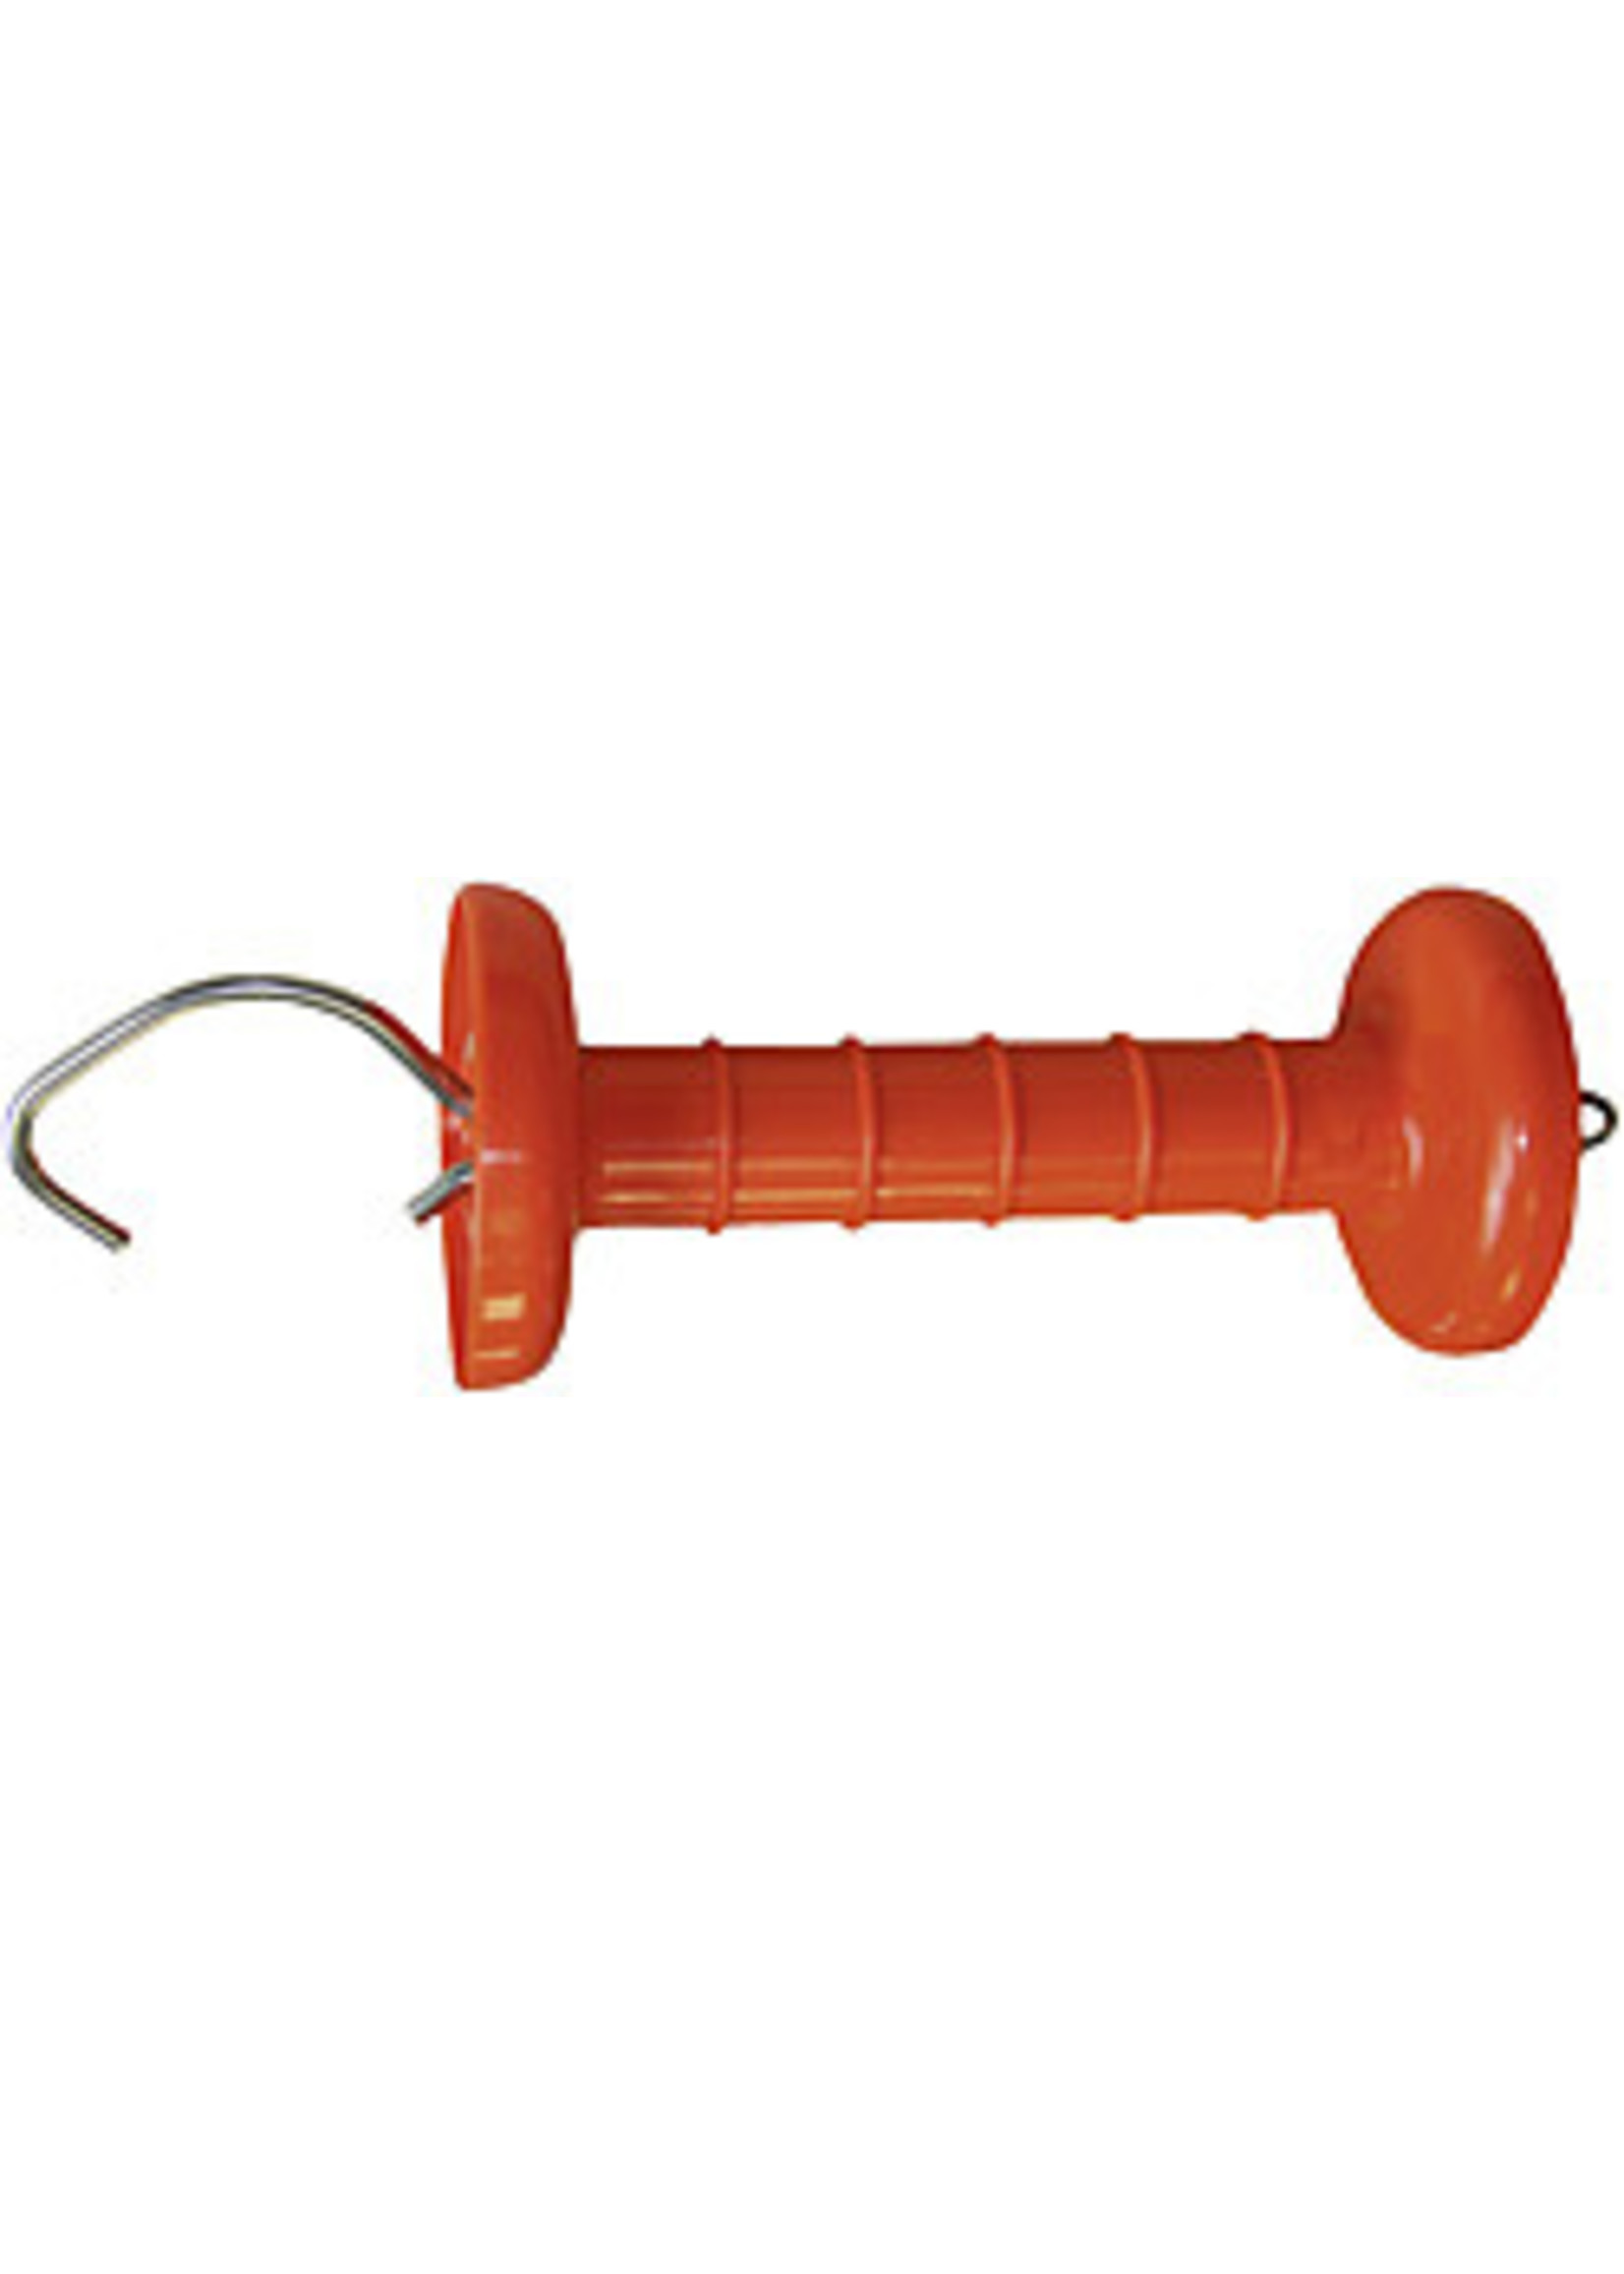 Special gate handle orange, wide hand protection